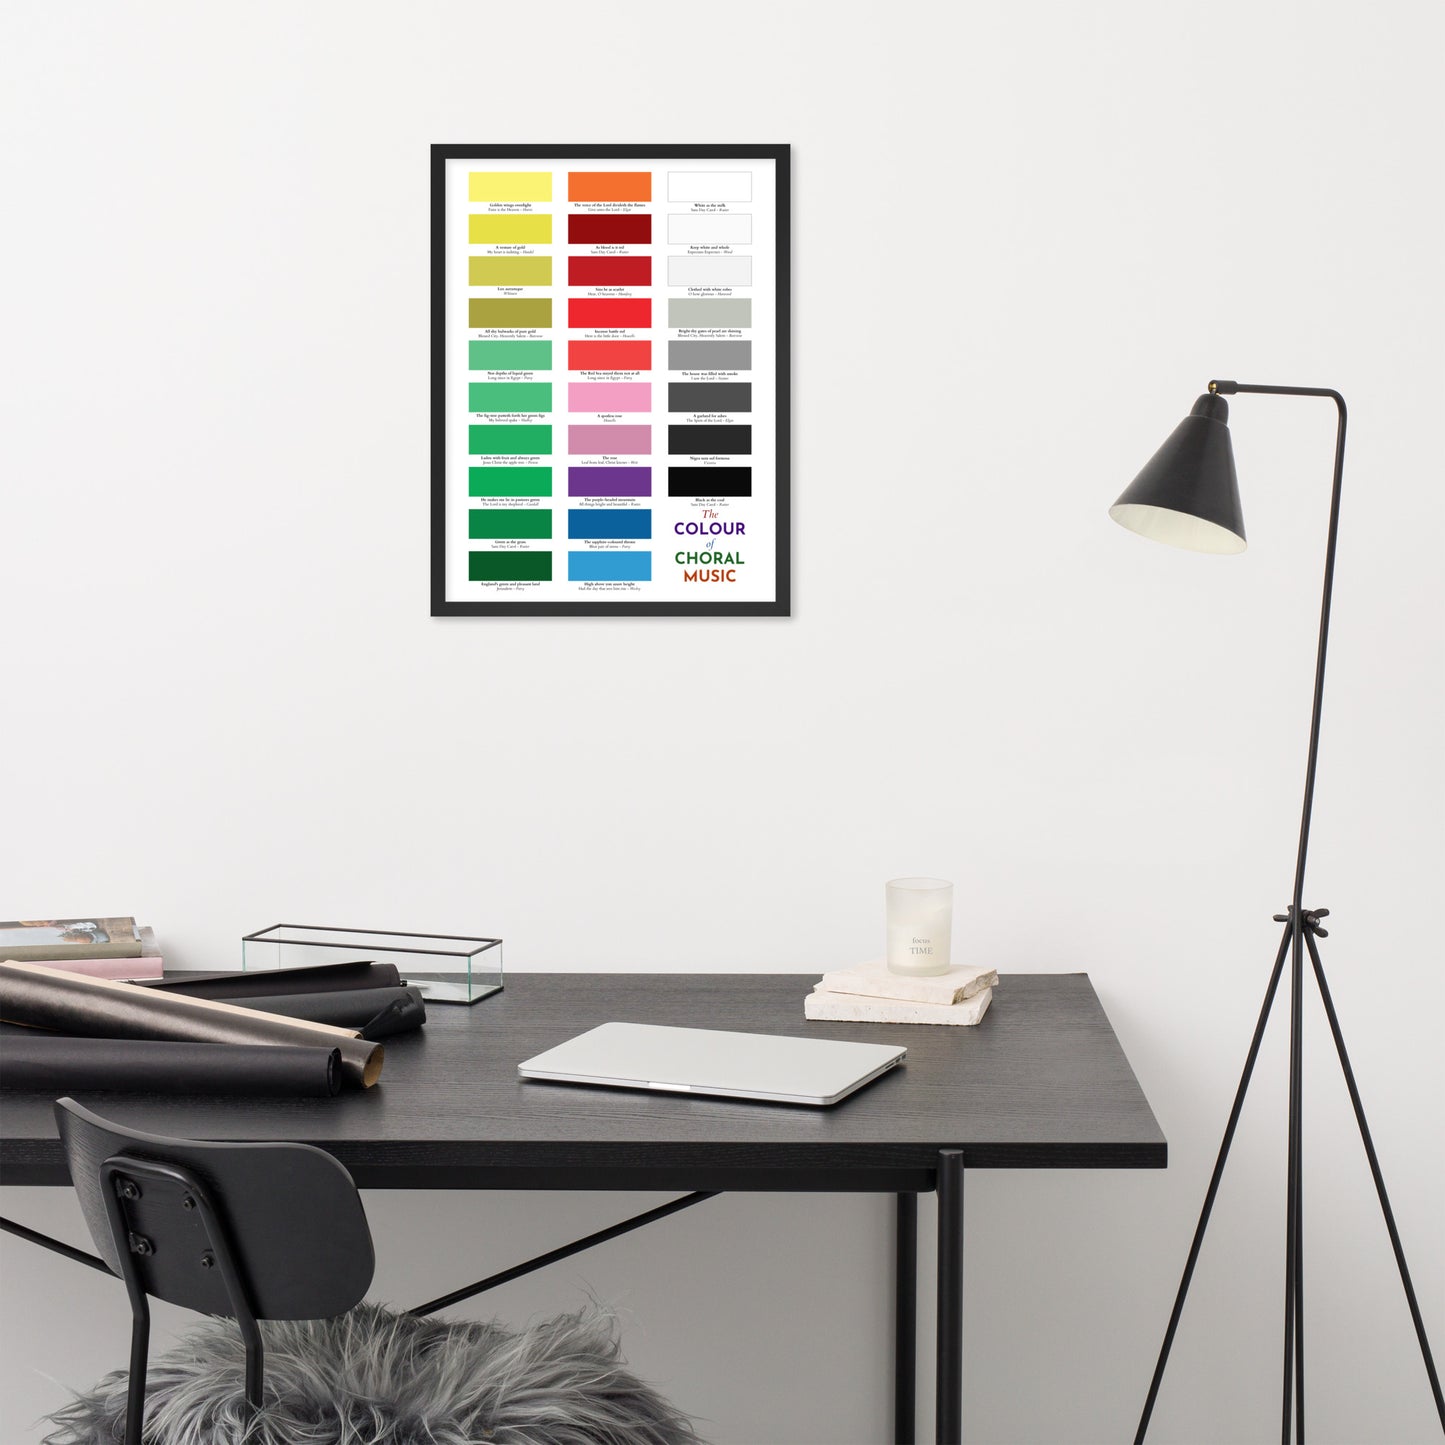 The Colour of Choral Music - Framed Poster